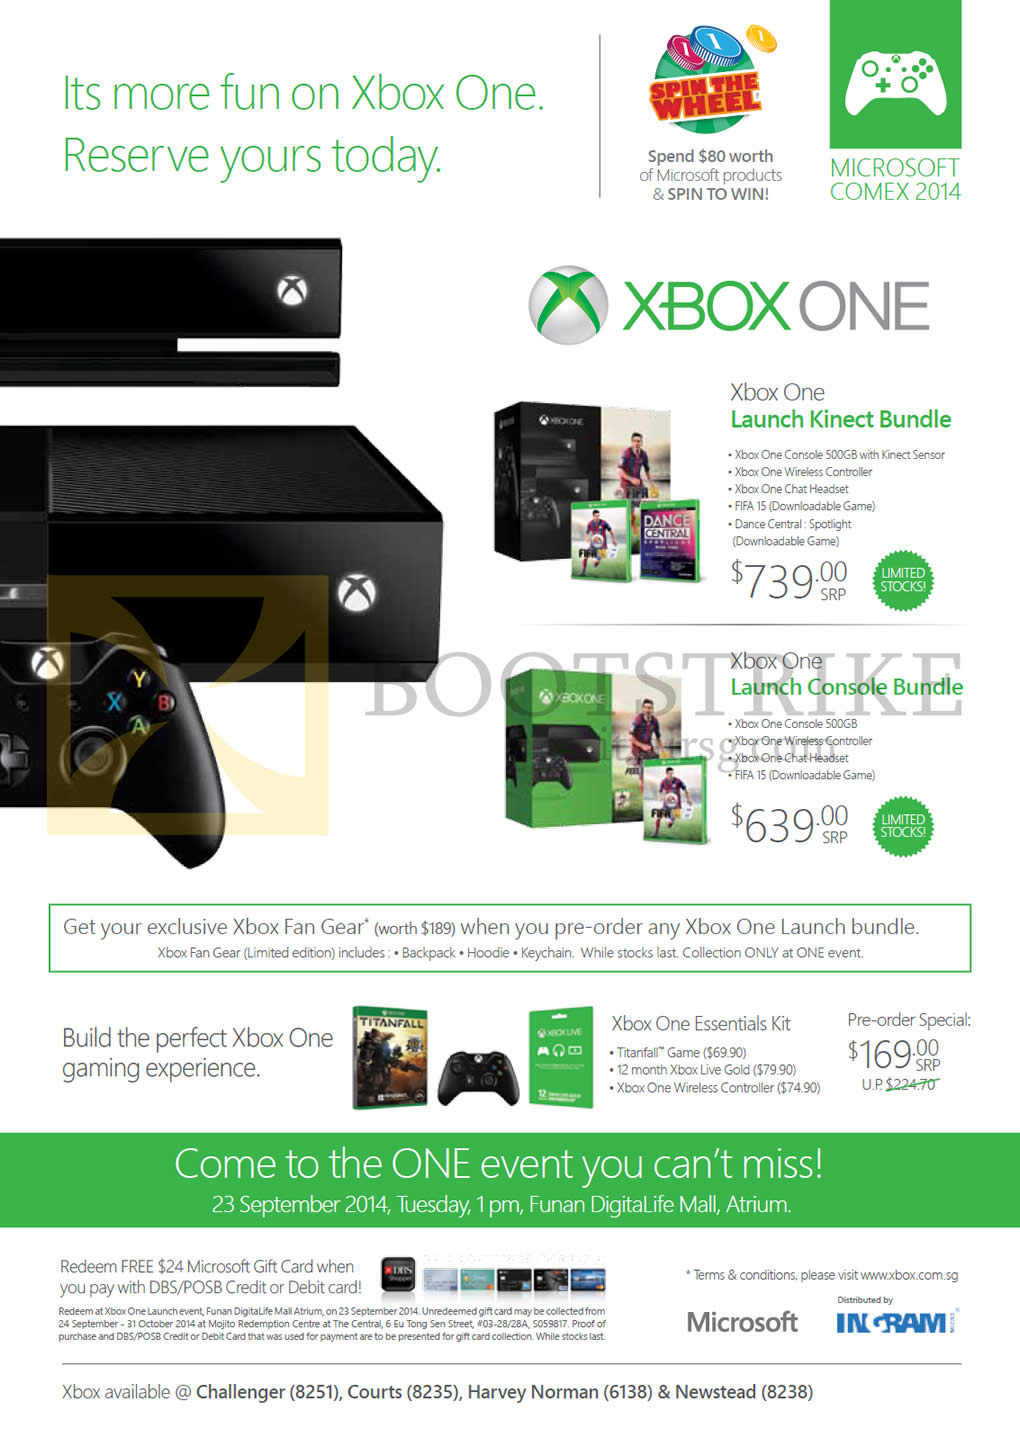 COMEX 2014 price list image brochure of Microsoft Xbox One, Launch Kinect Bundle, Launch Console Bundle, Xbox One Essentials Kit